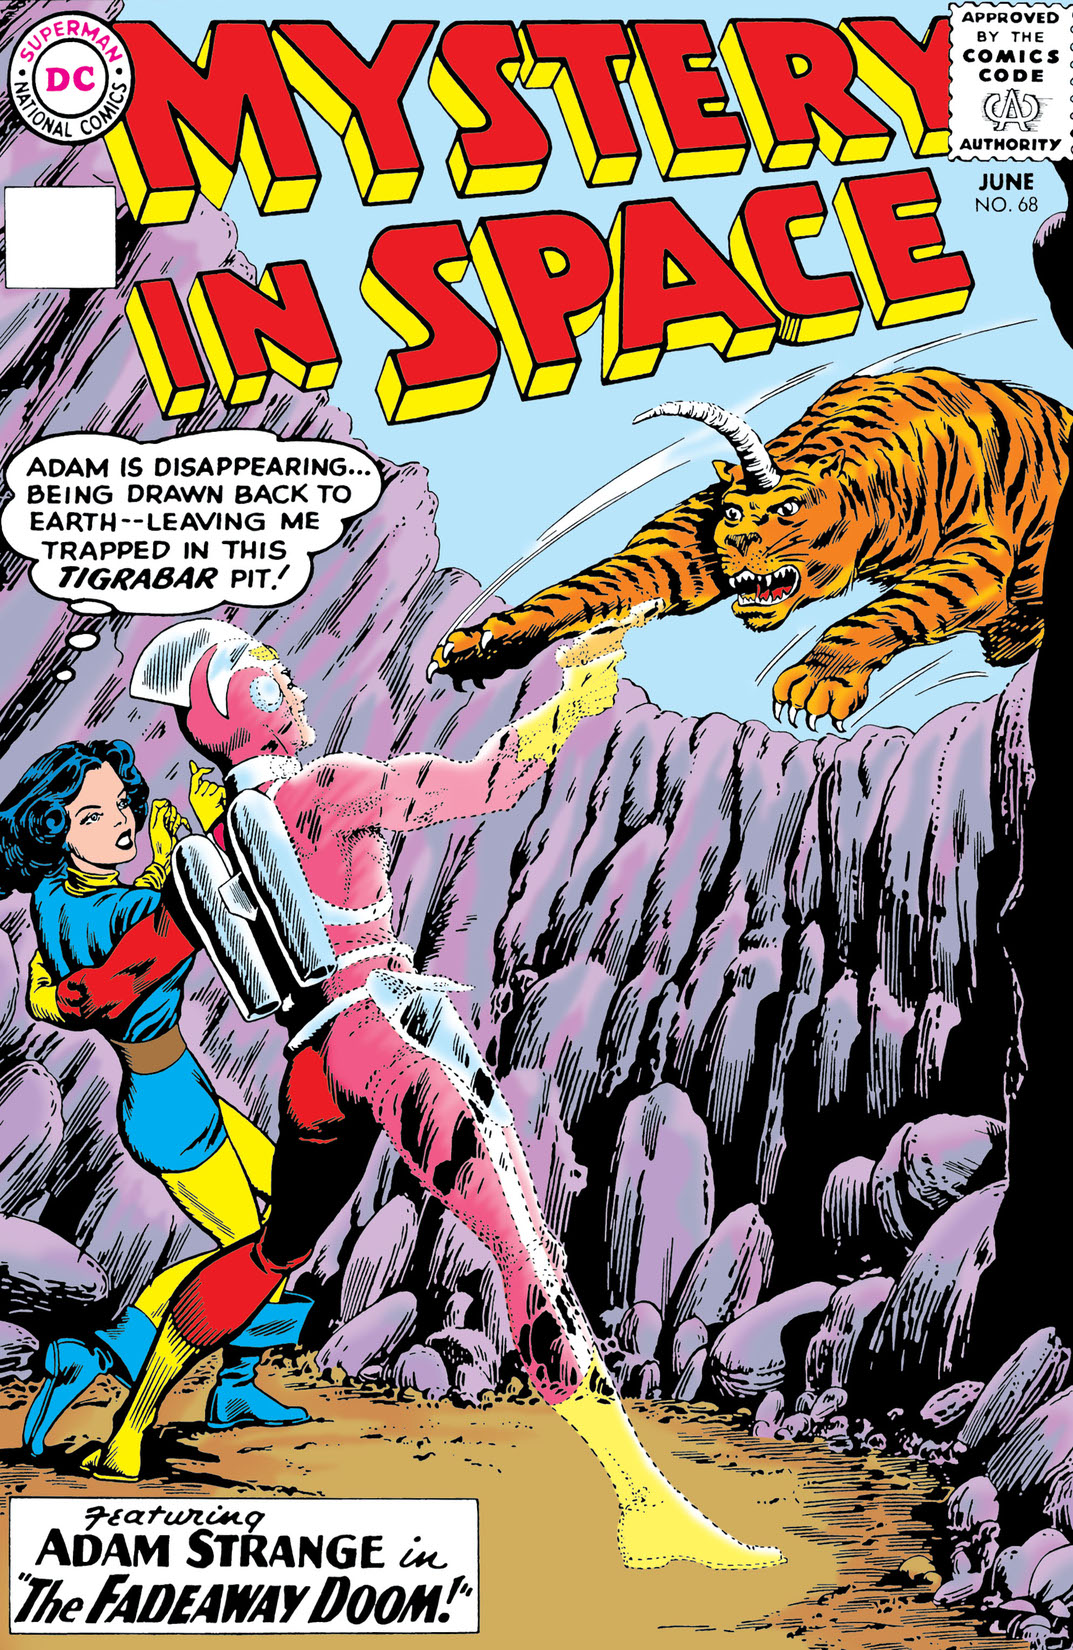 Mystery in Space (1951-) #68 preview images